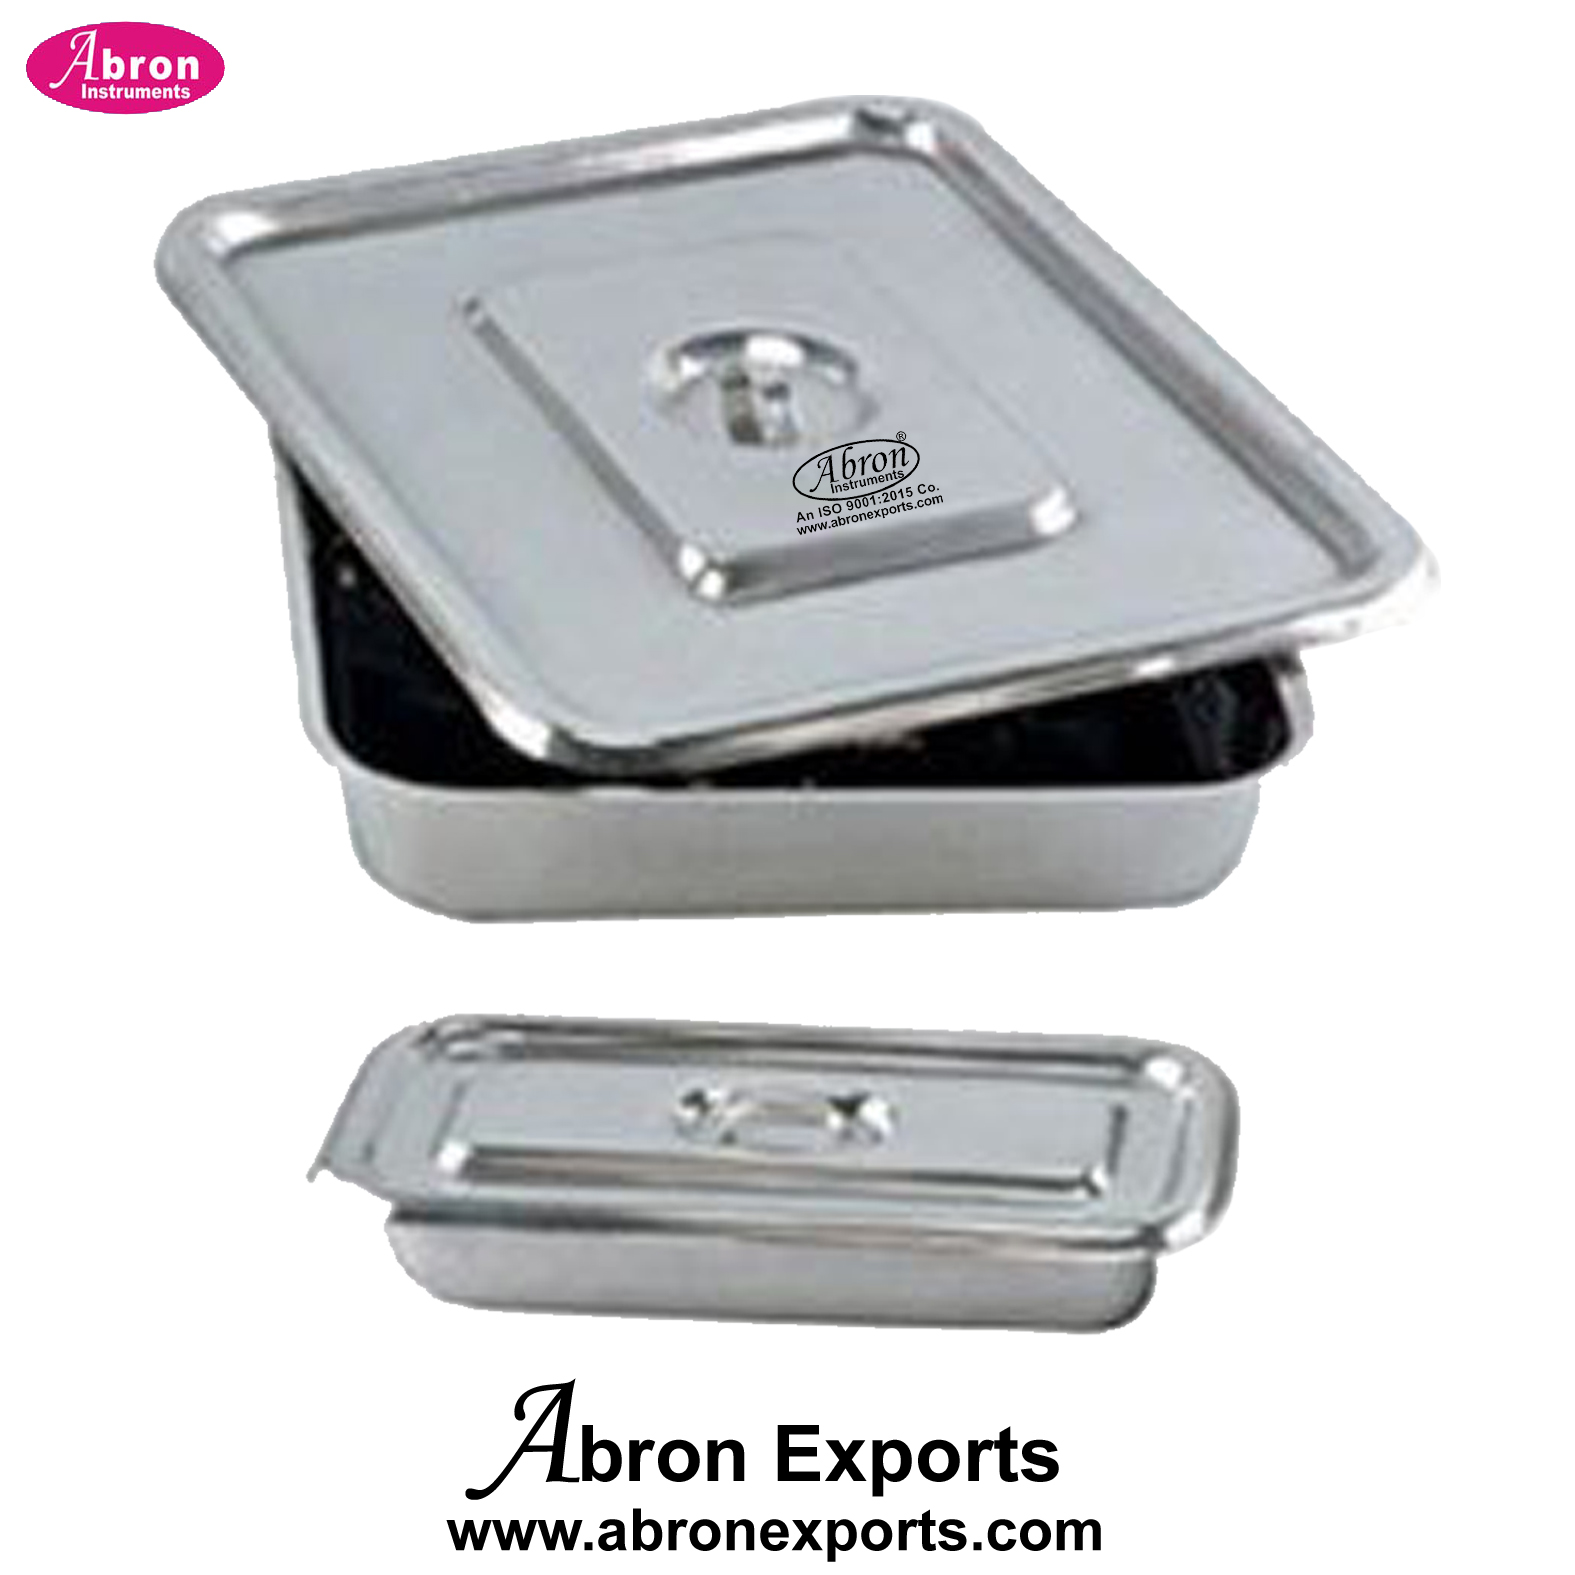 Hospital Surgical Instruments Trays with cover SS stainless steel 8x6inch 9x6inch etc Abron ABM-2306TS8